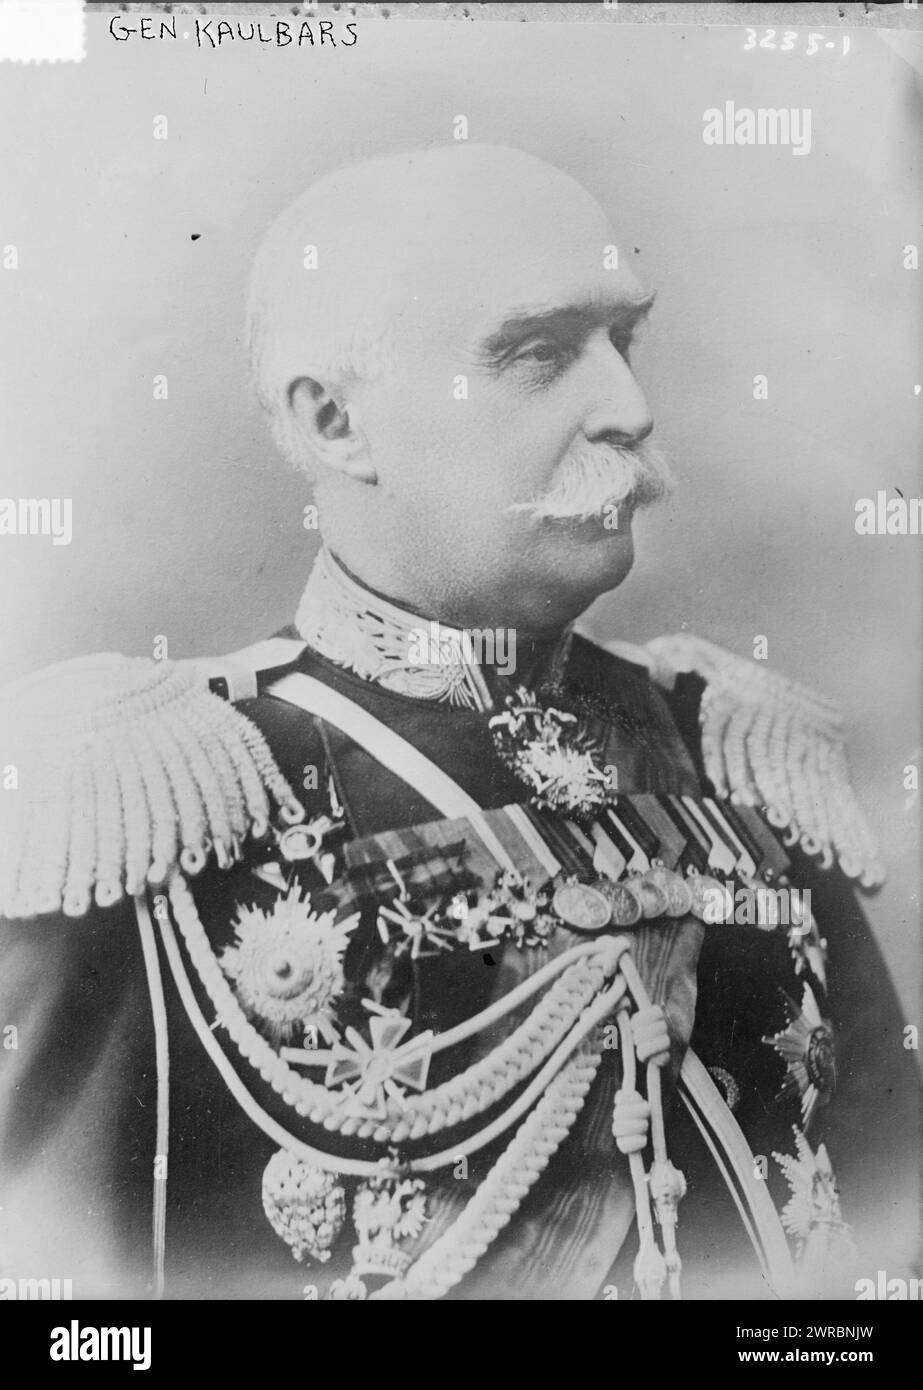 Gen. Kaulbars, Photograph shows Baron Alexander Vasilyevich Kaulbars (1844-1925), who was a general in the Imperial Russian Army., between ca. 1910 and ca. 1915, Glass negatives, 1 negative: glass Stock Photo